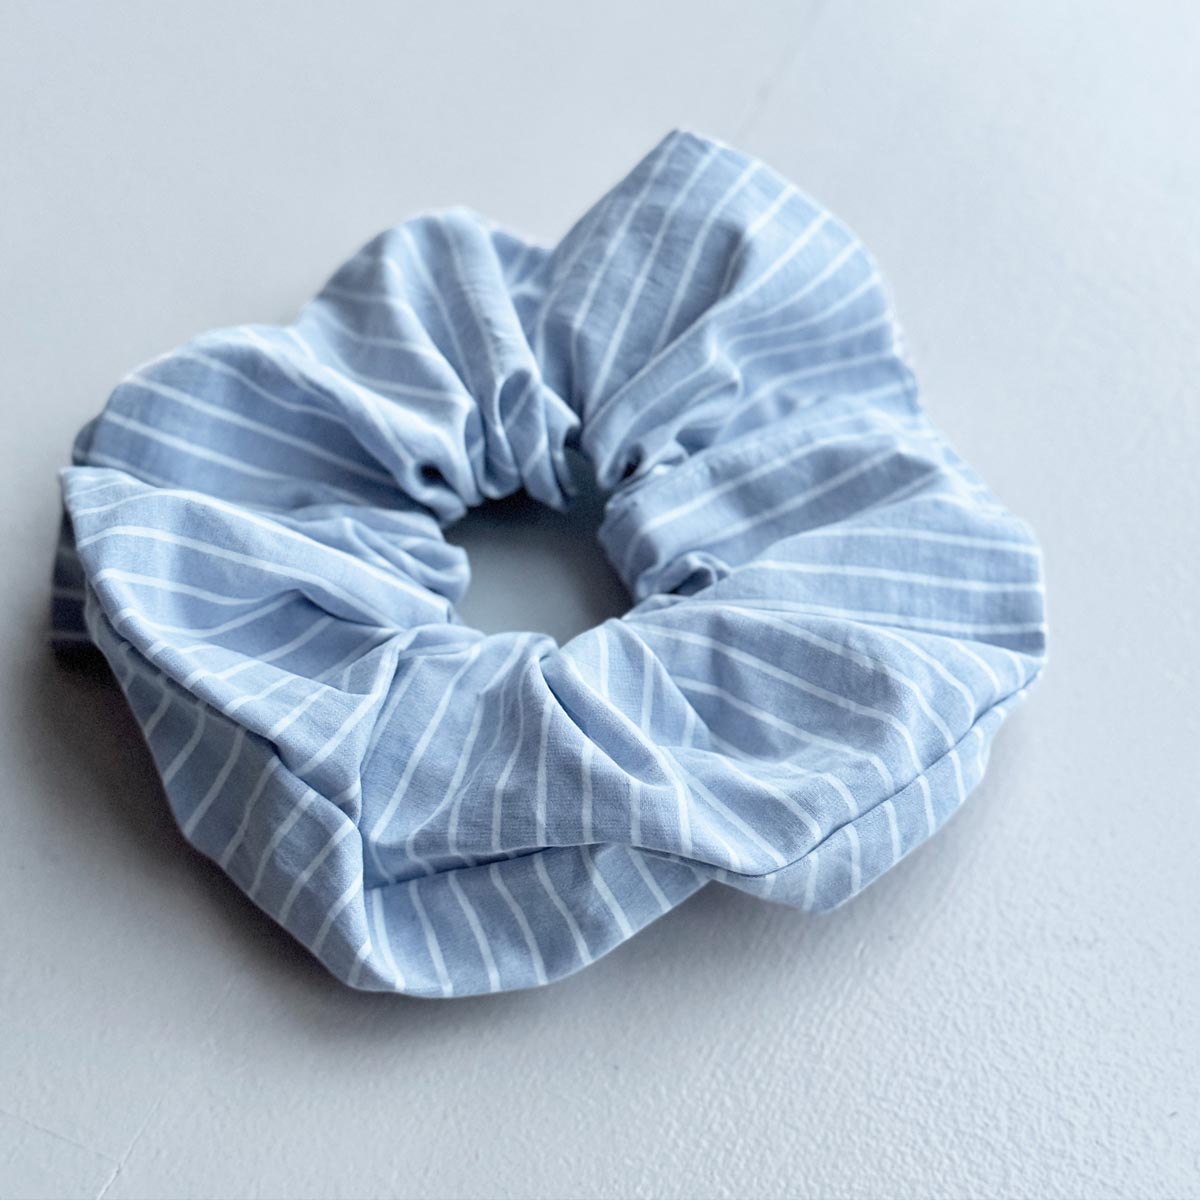 Upcycled scrunchie, blue